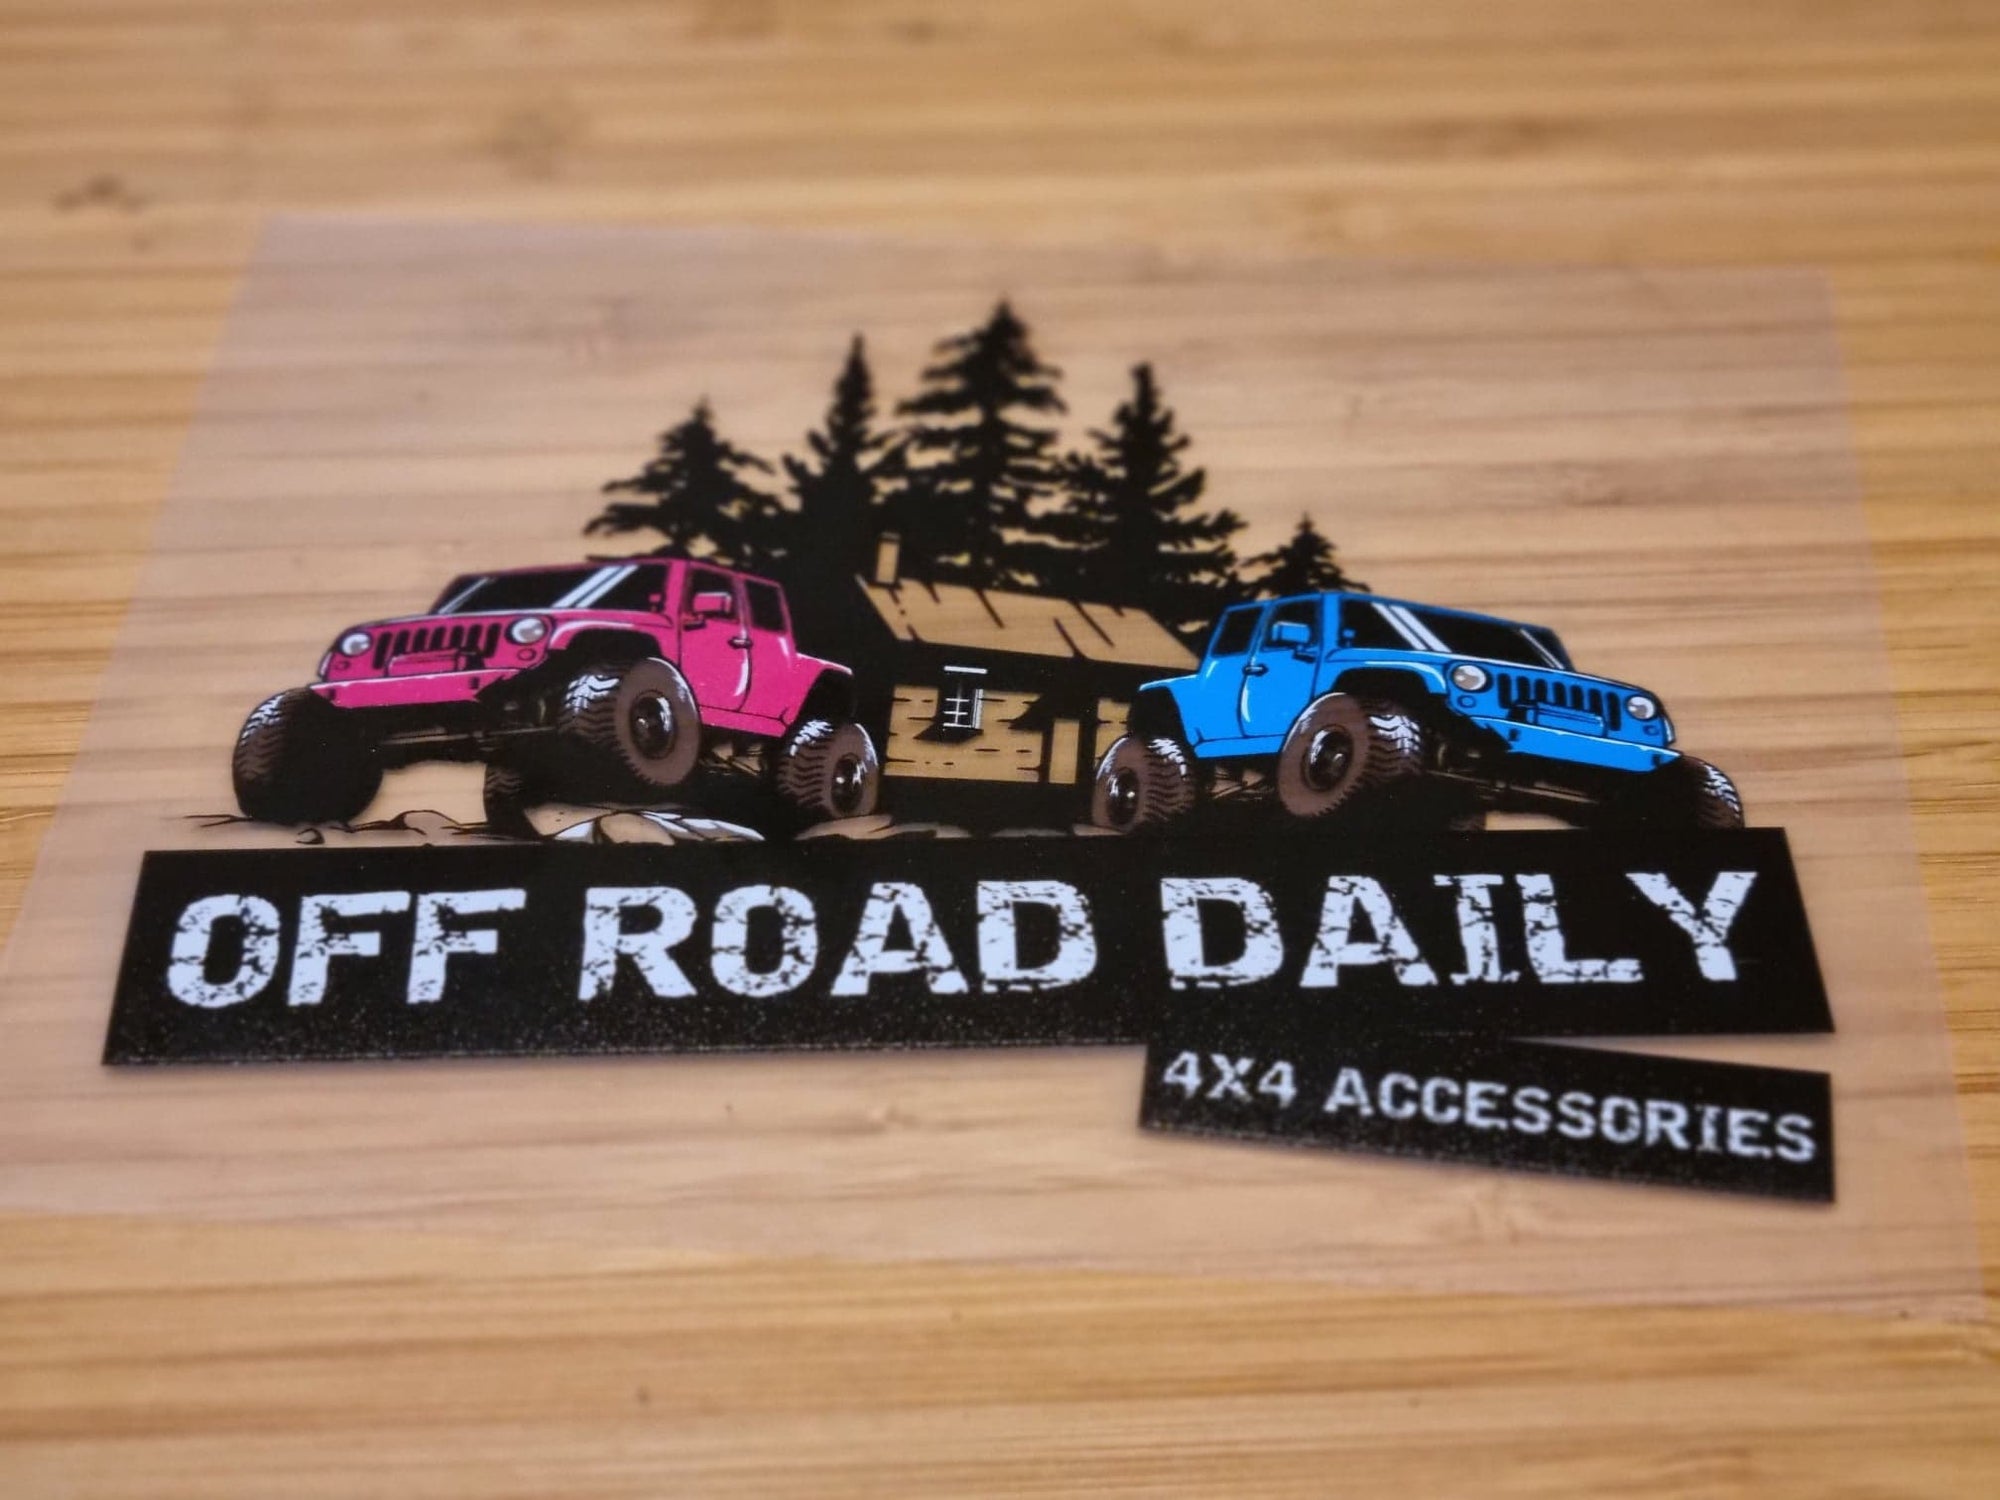 Offroad Daily sticker